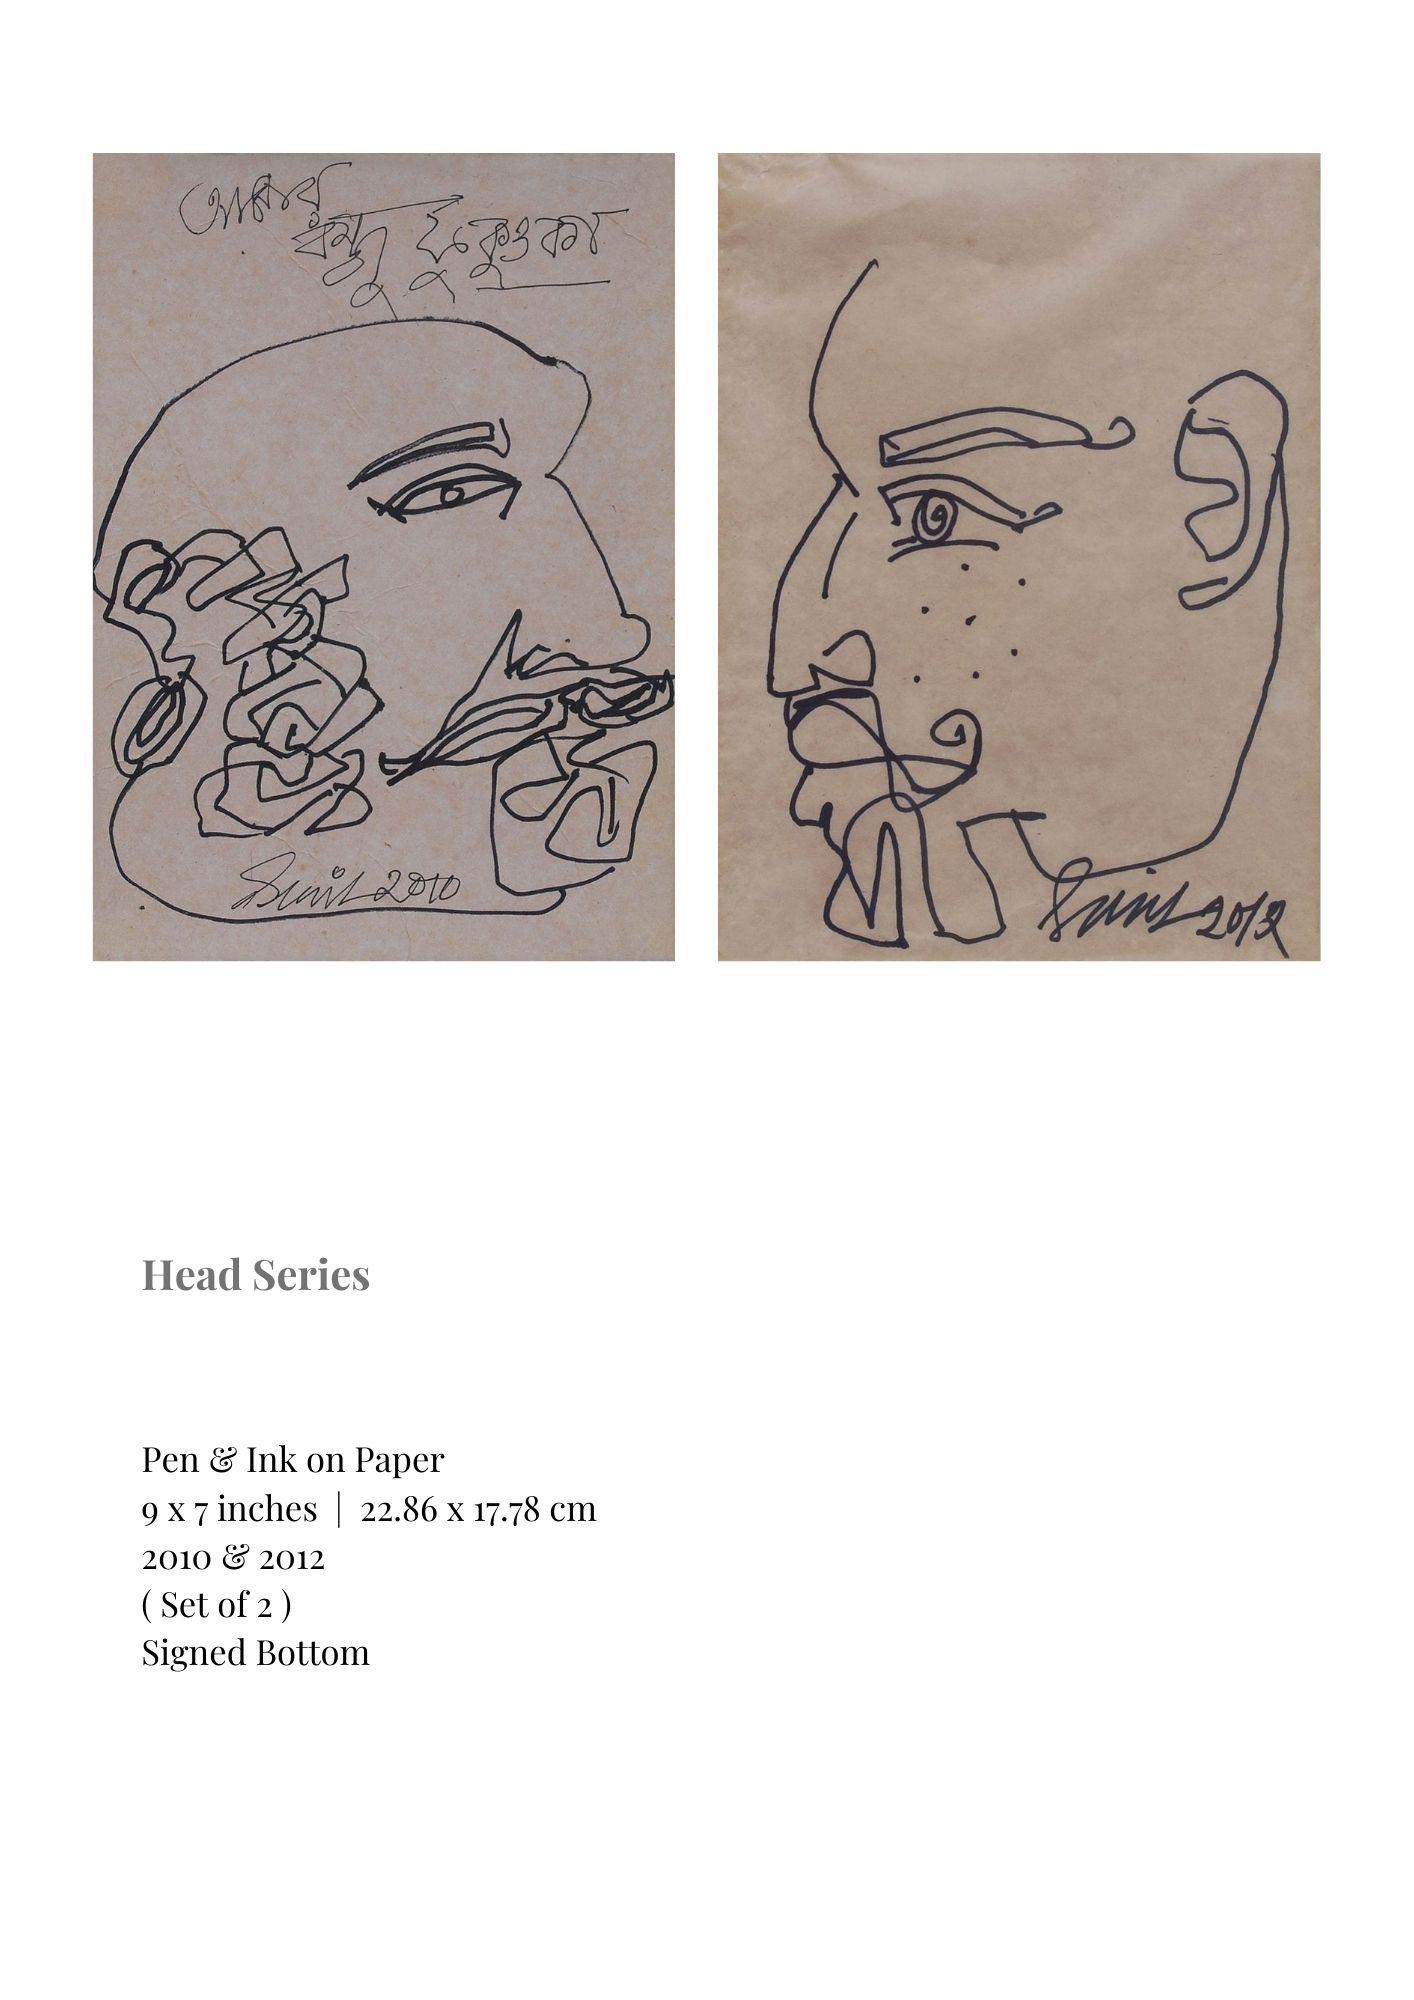 Head Series, Pen & Ink on Paper (Set of 2) by Modern Indian Artist "In Stock"